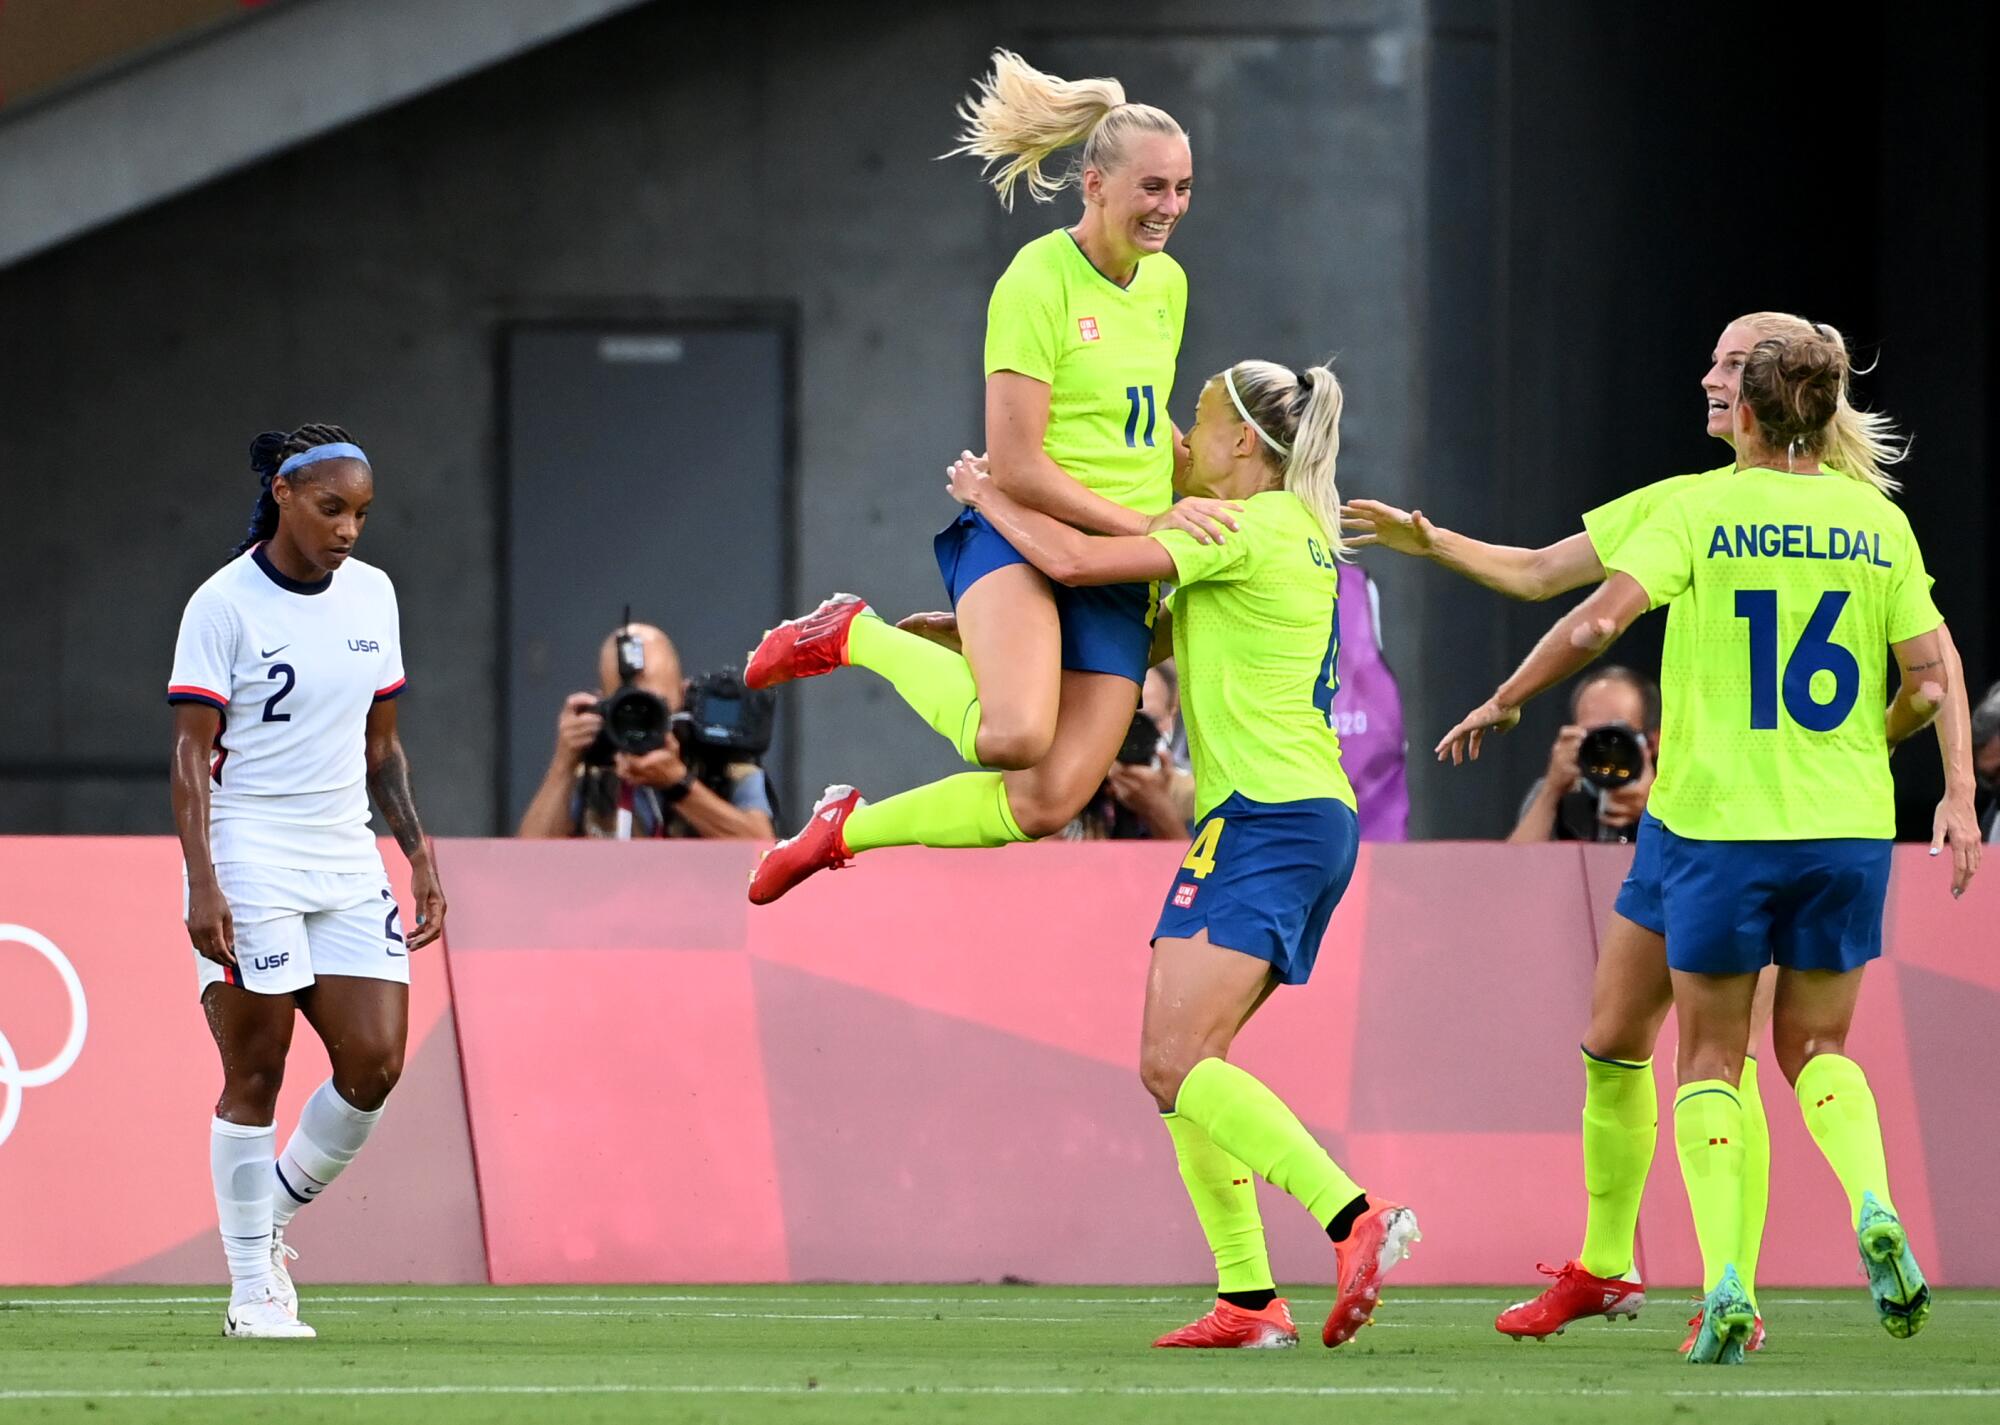 Sweden's Stina Blackstenius jumps into the arms of a teammate after scoring a goal.